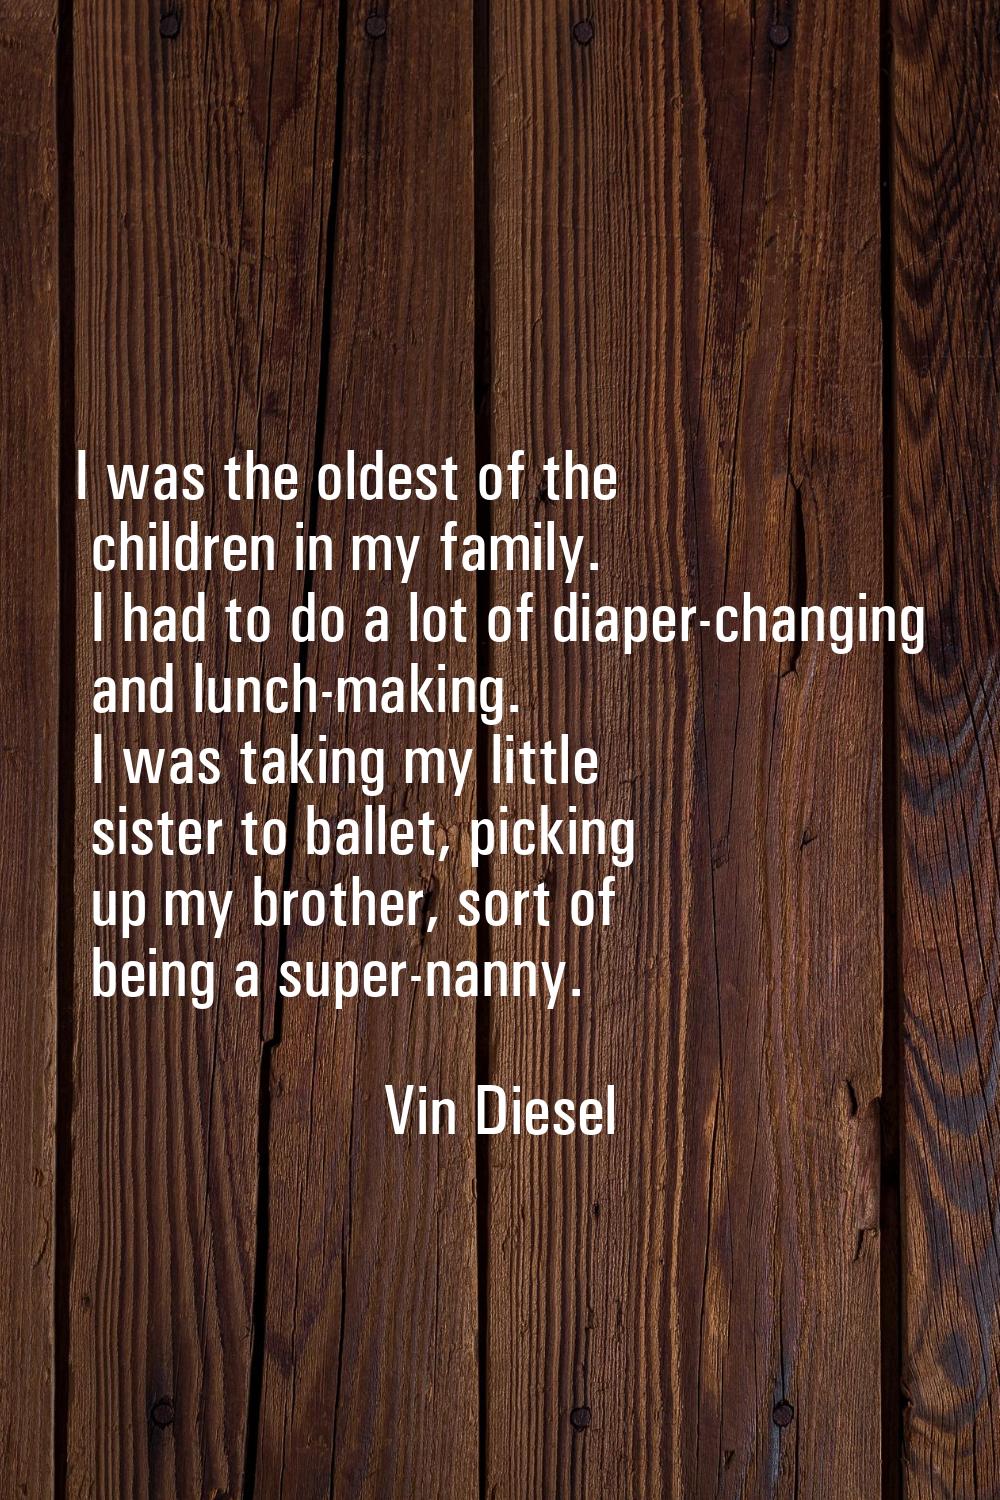 I was the oldest of the children in my family. I had to do a lot of diaper-changing and lunch-makin